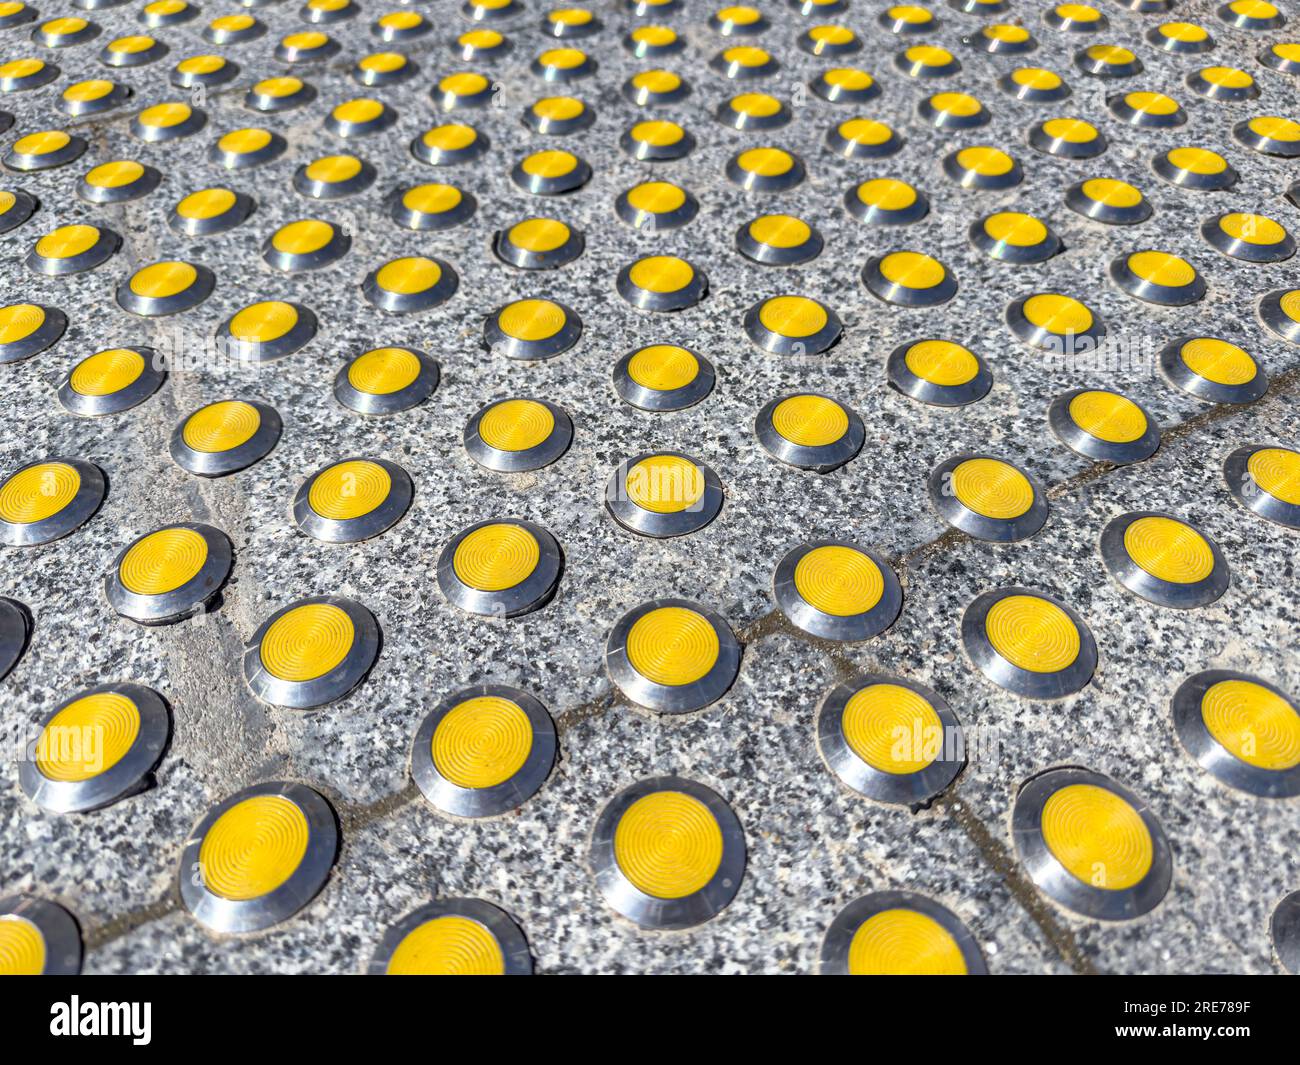 tactile indicators, closeup view. braille block on granite sidewalk for visually impaired. Stock Photo